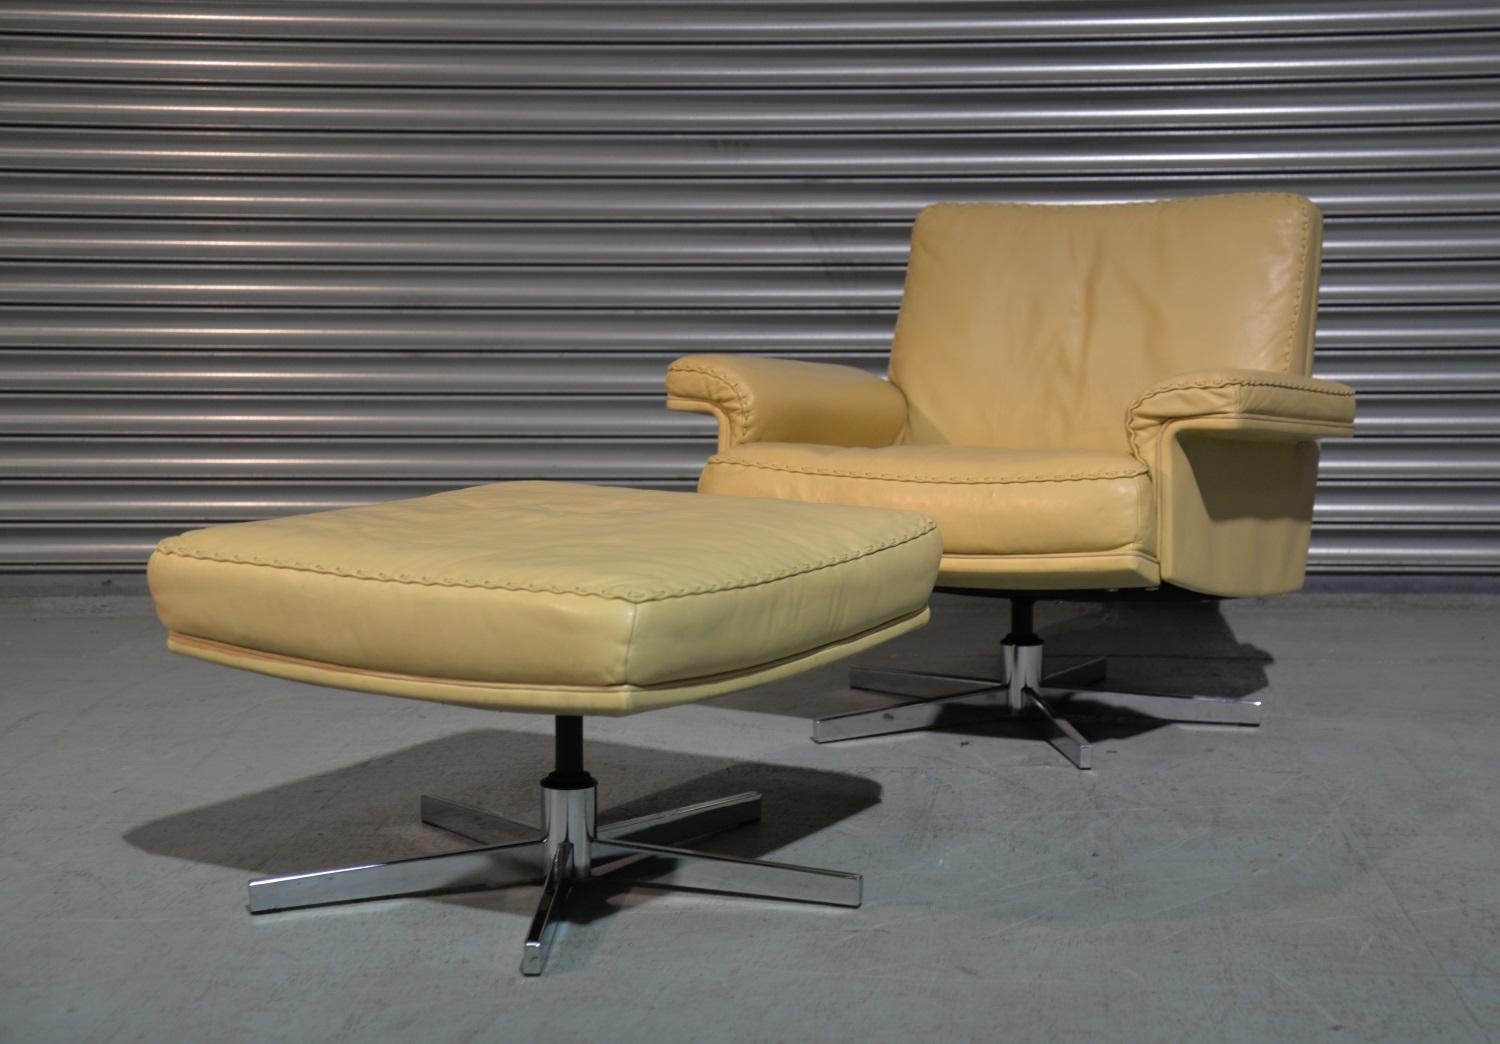 Discounted airfreight for our US and International customers (from 2 weeks door to door)

We are delighted to bring to you a highly desirable and ultra rare vintage De Sede DS 35 swivel lounge armchair with ottoman hand built in the early 1970s by